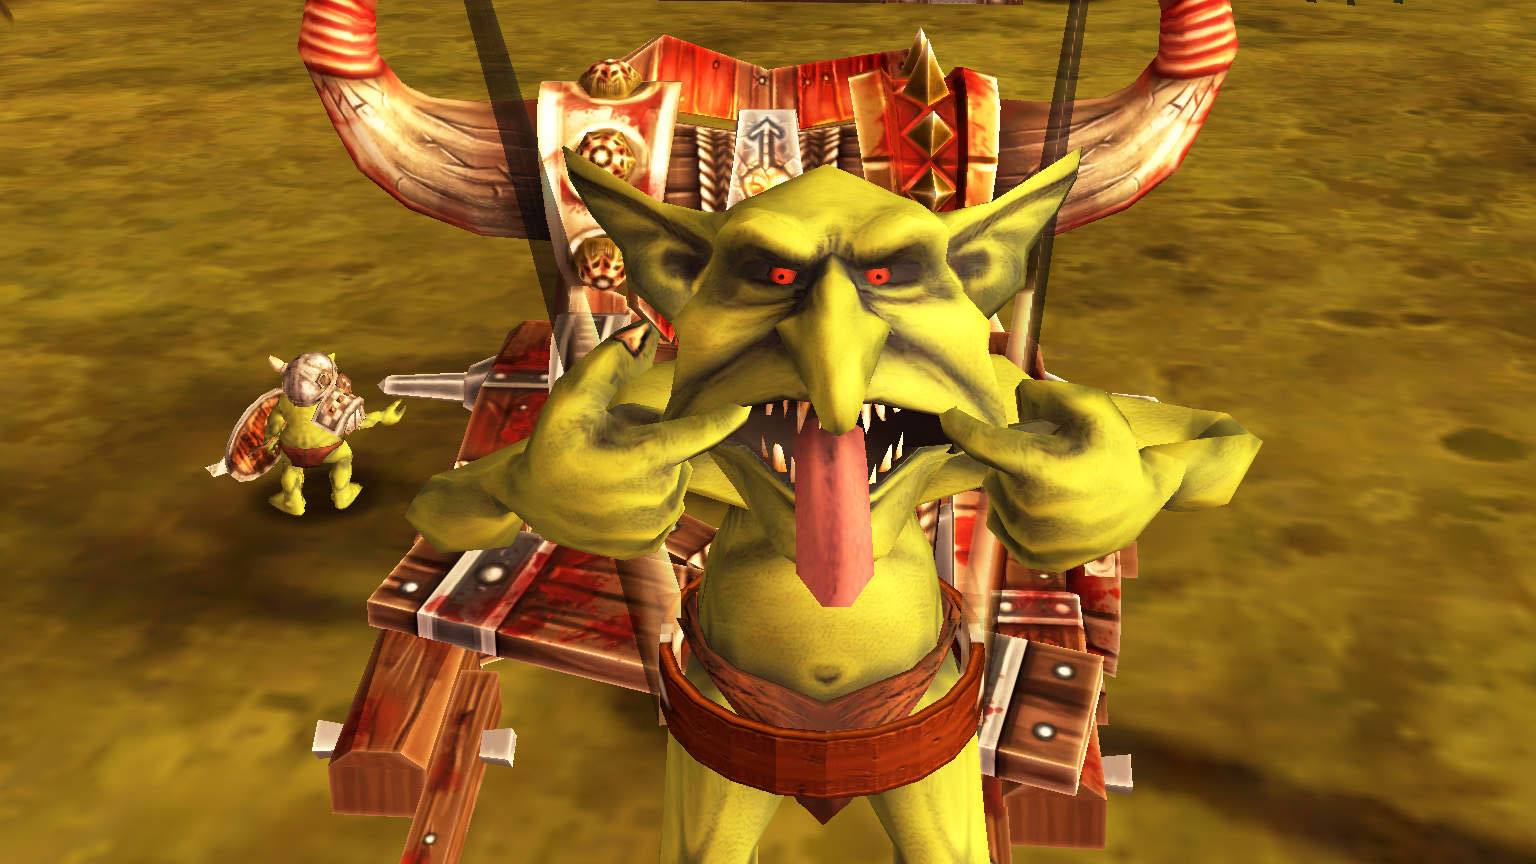 Get Lots of Warhammer for Little Price in the Humble Mobile Bundle